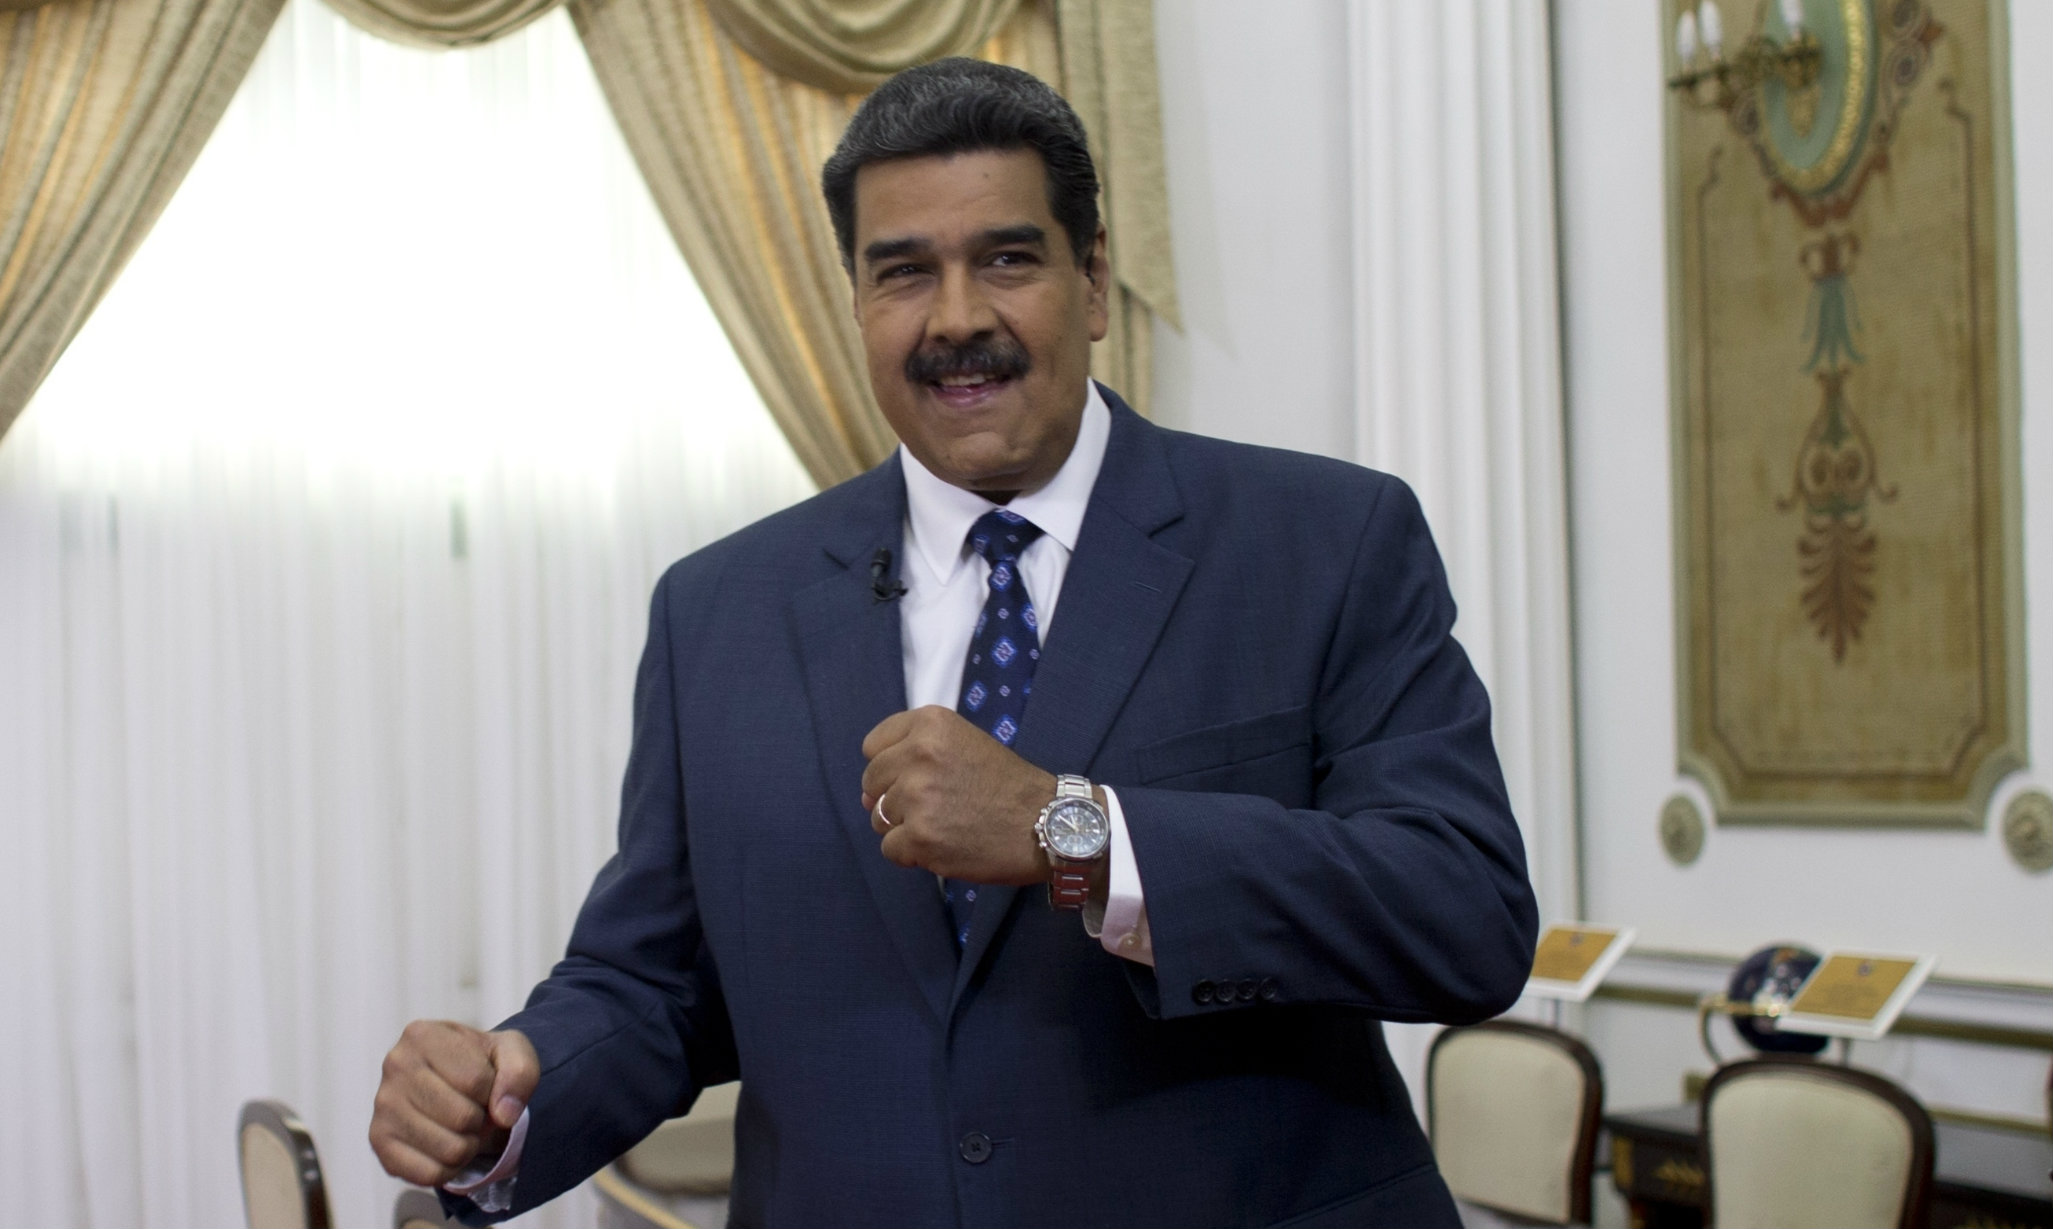 Nicolas Maduro before the interview with Associated Press in Caracas, Venezuela, on Thursday.